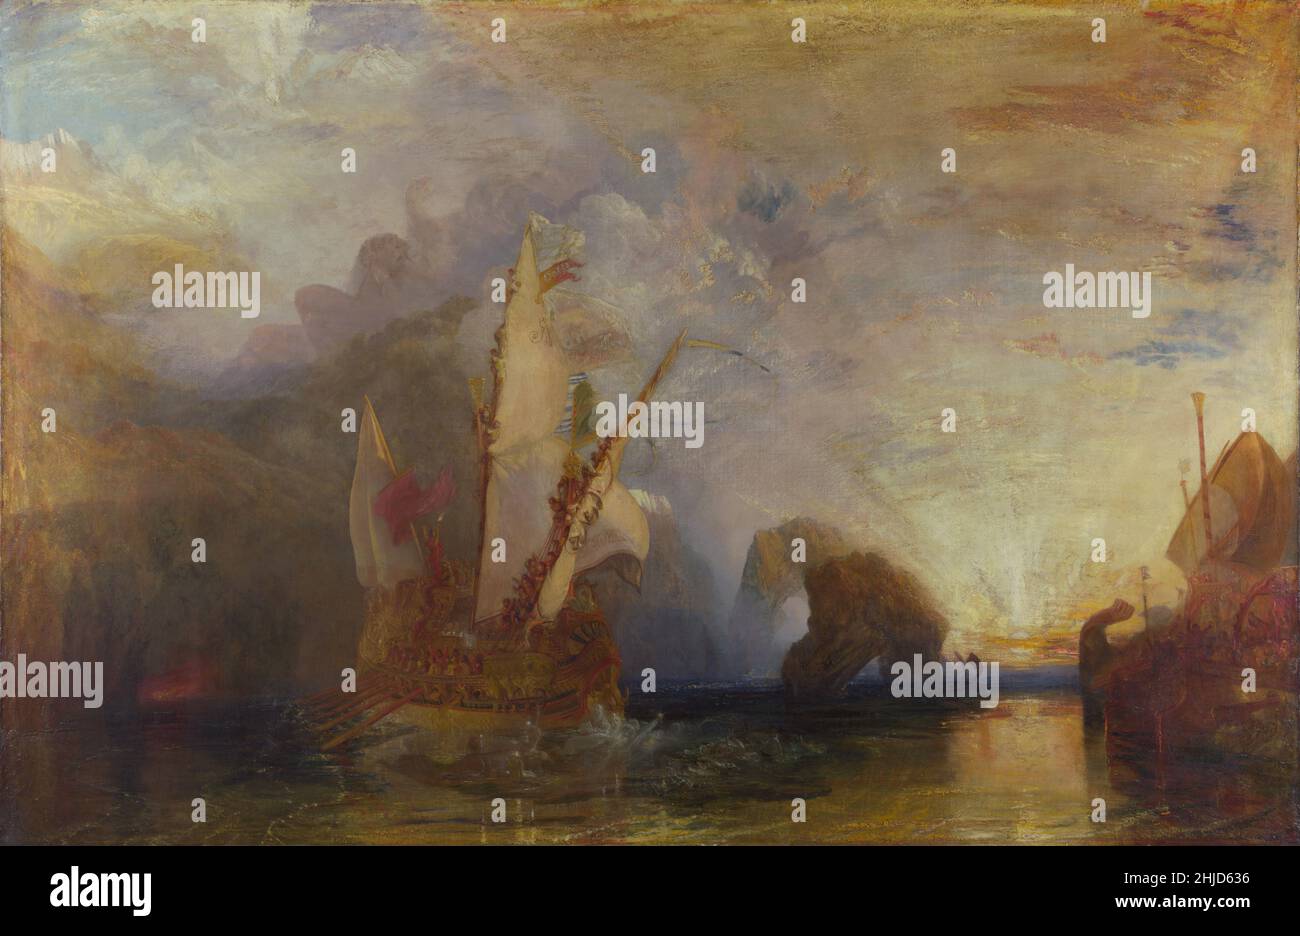 Ulysses deriding Polyphemus painting by William Turner Stock Photo